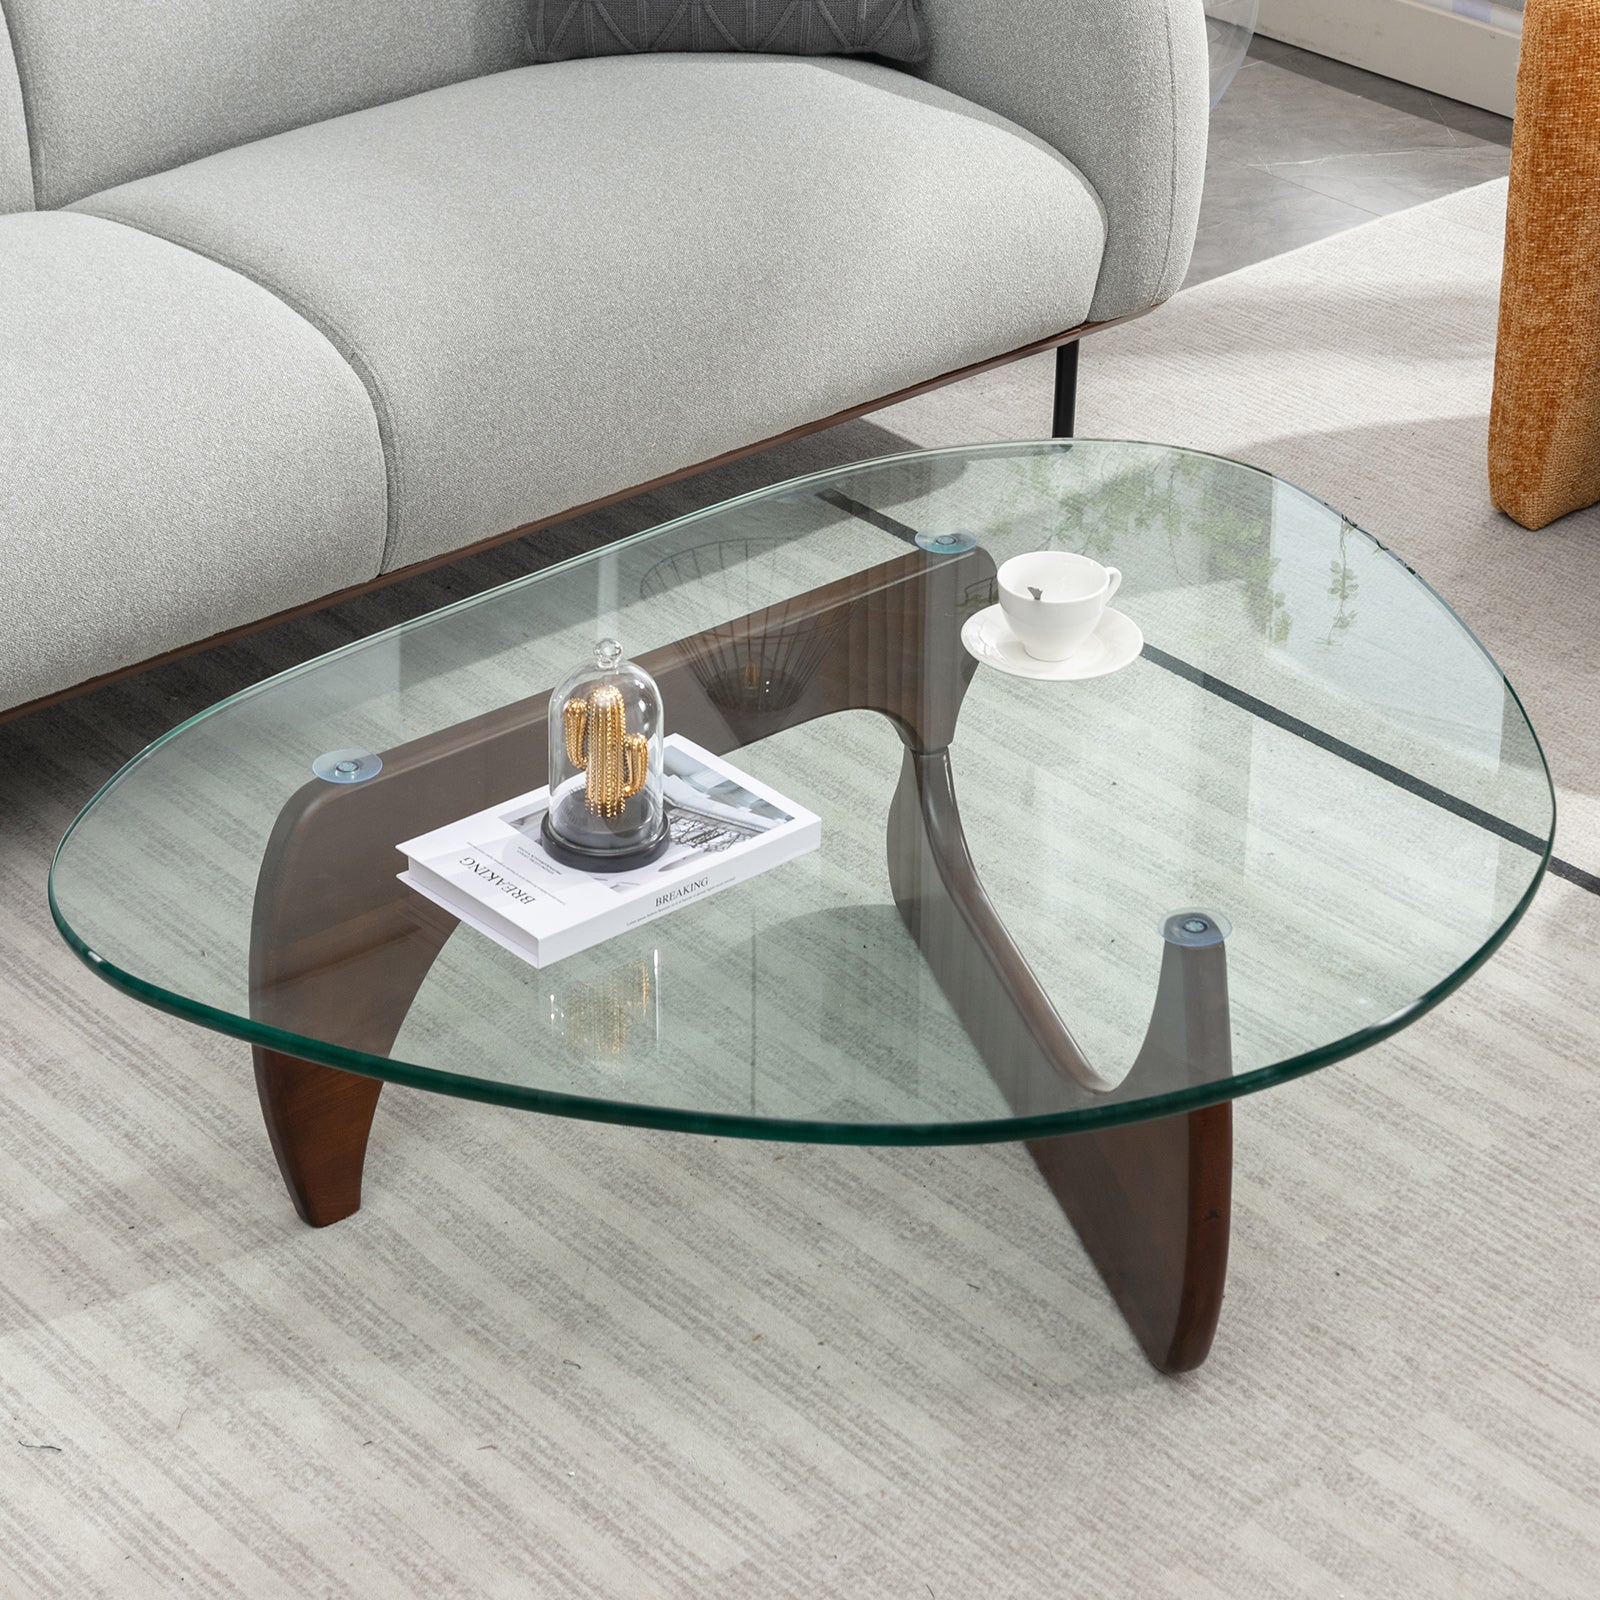 Mjkone Noguchi Triangle Glass Coffee Table | Modern Glass Top Table with Solid Wood Frame | Coffee Table with Tempered Glass Top | Glass Coffee Table for Living Room